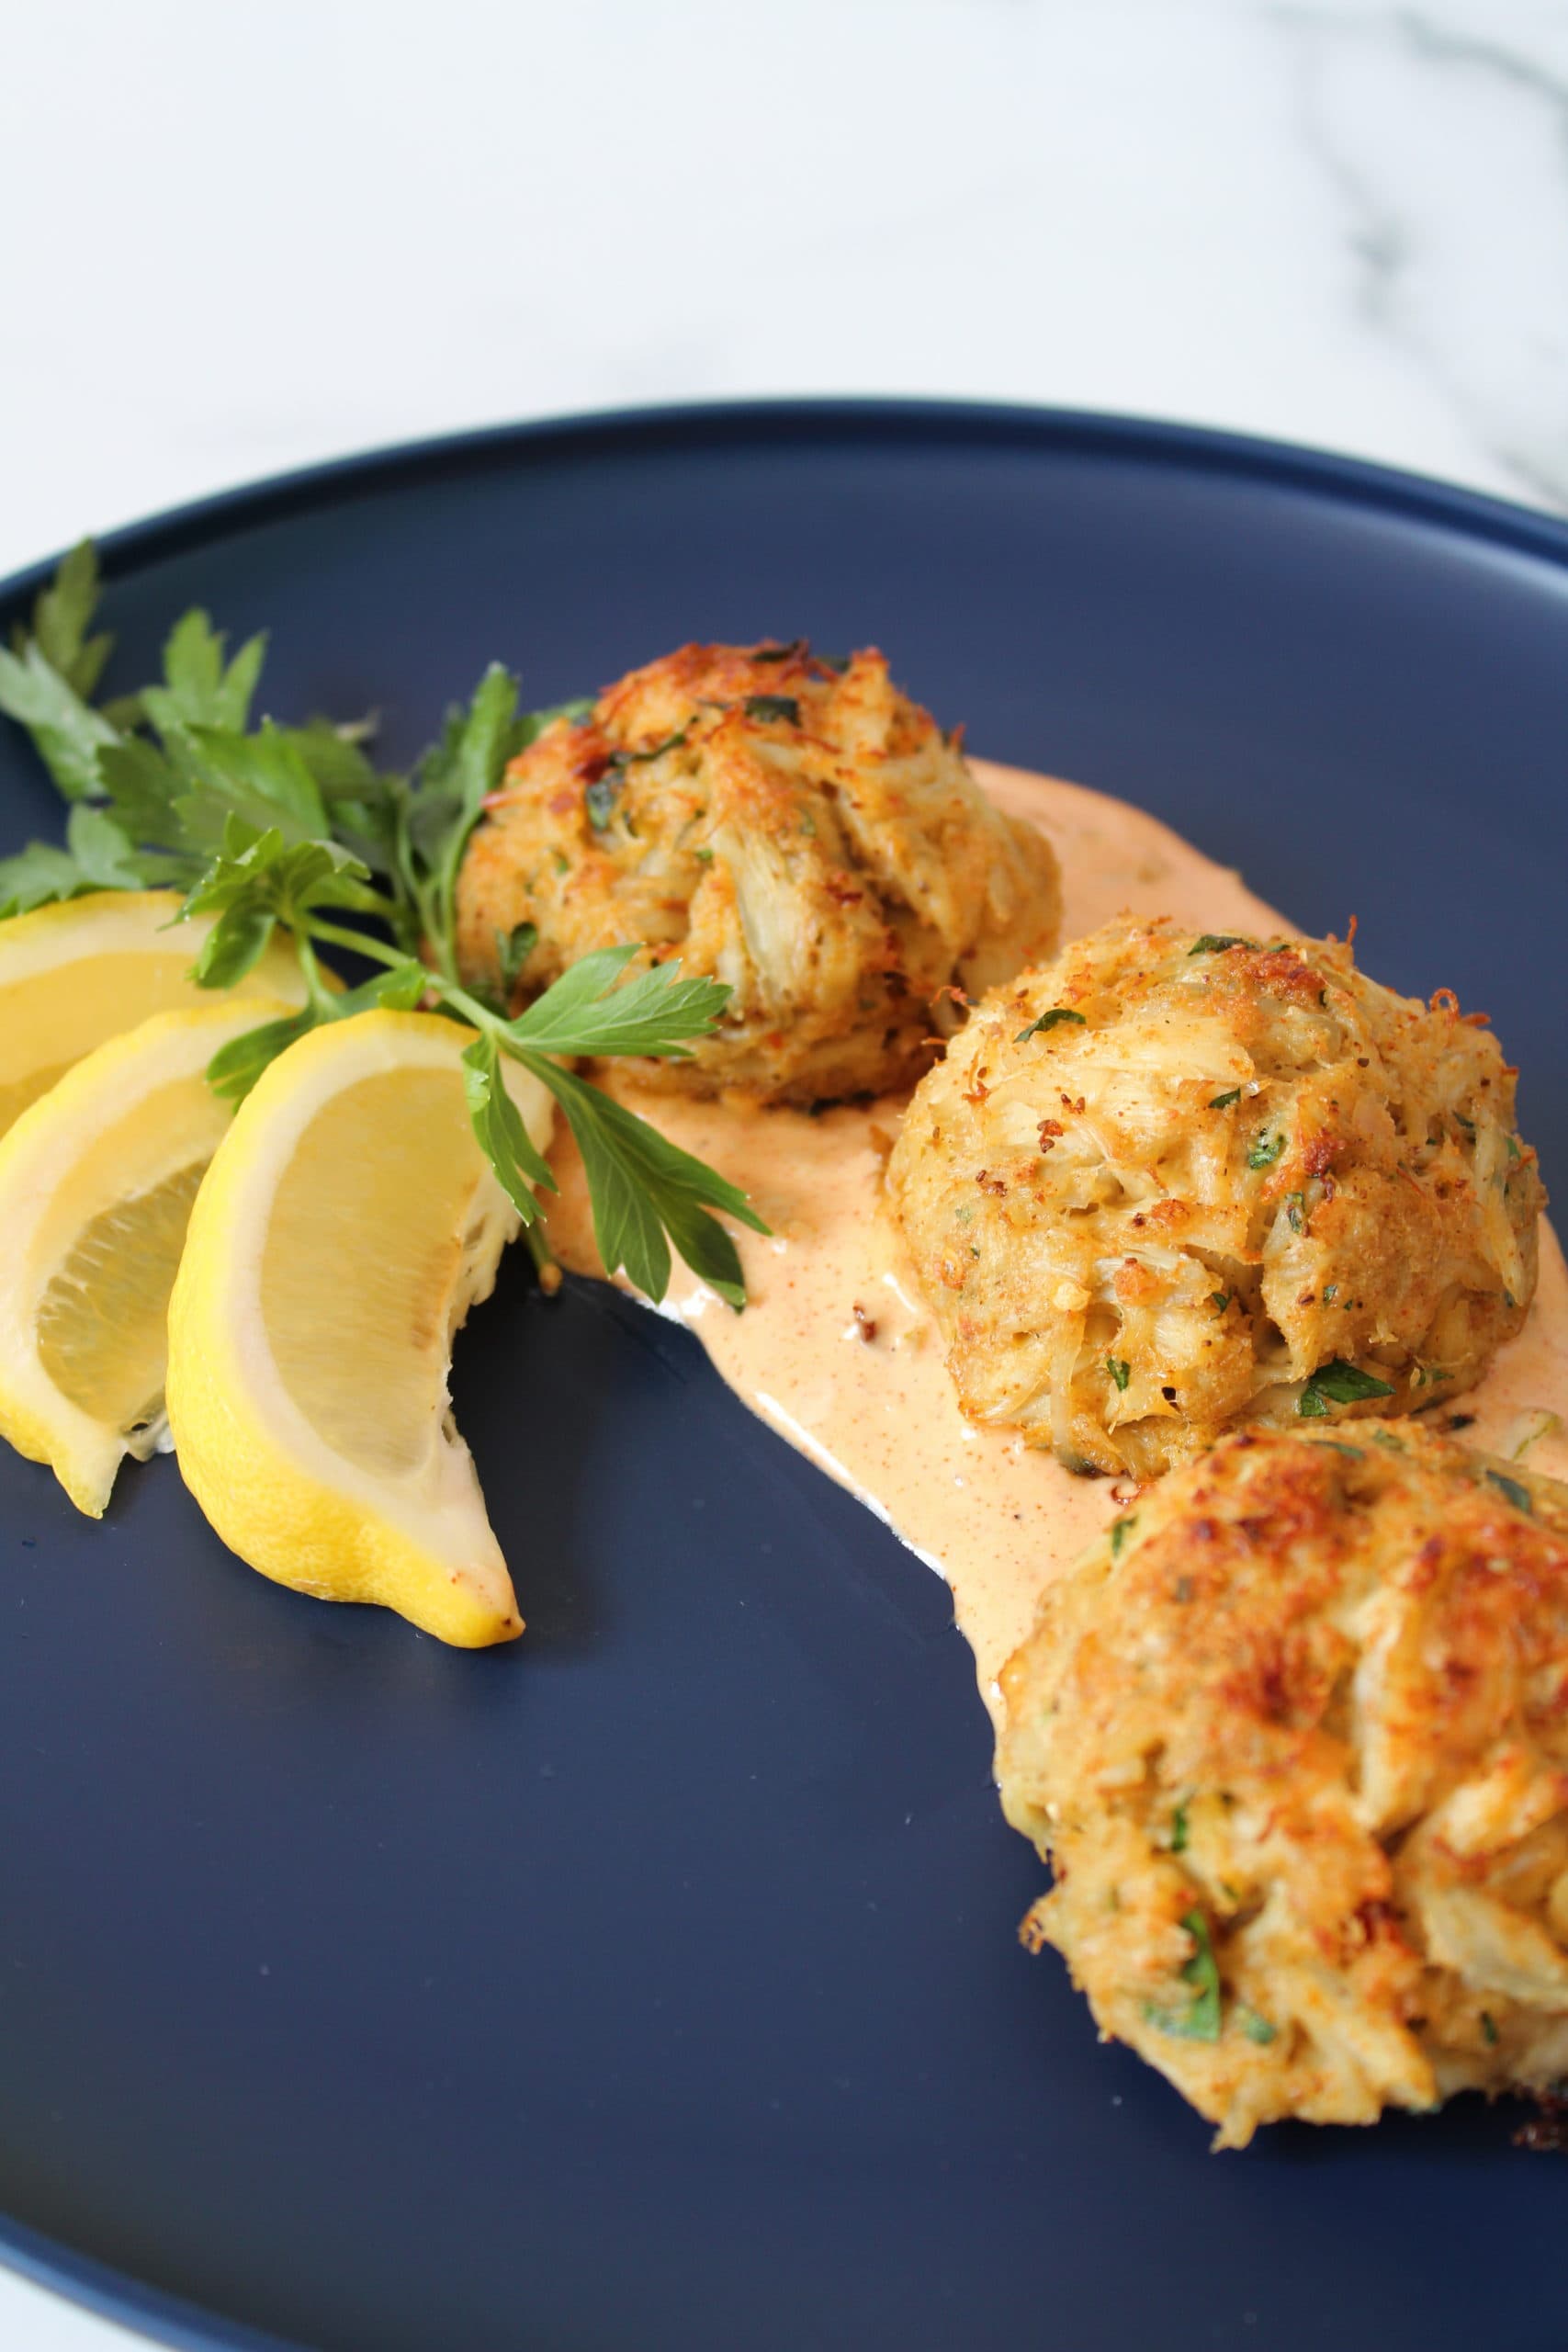 Imitation Crab Meat Cakes Recipe : Taste of Southern